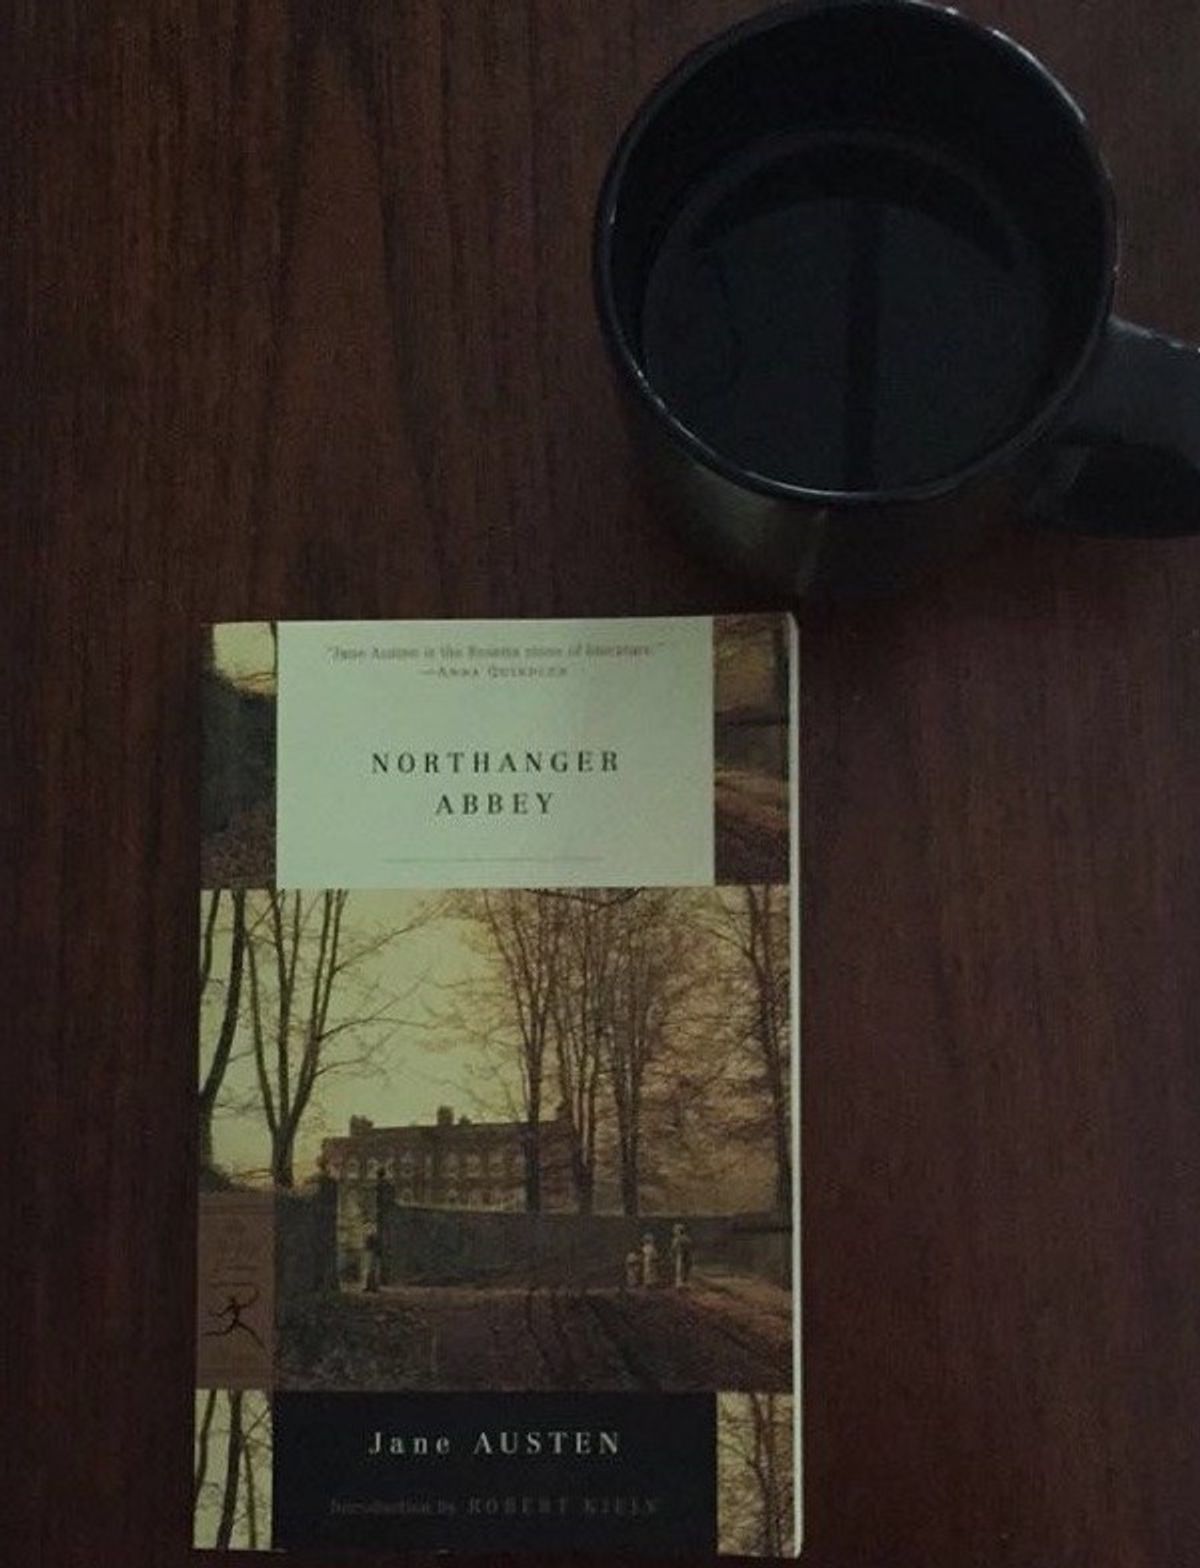 7 Reasons You Should Read "Northanger Abbey"